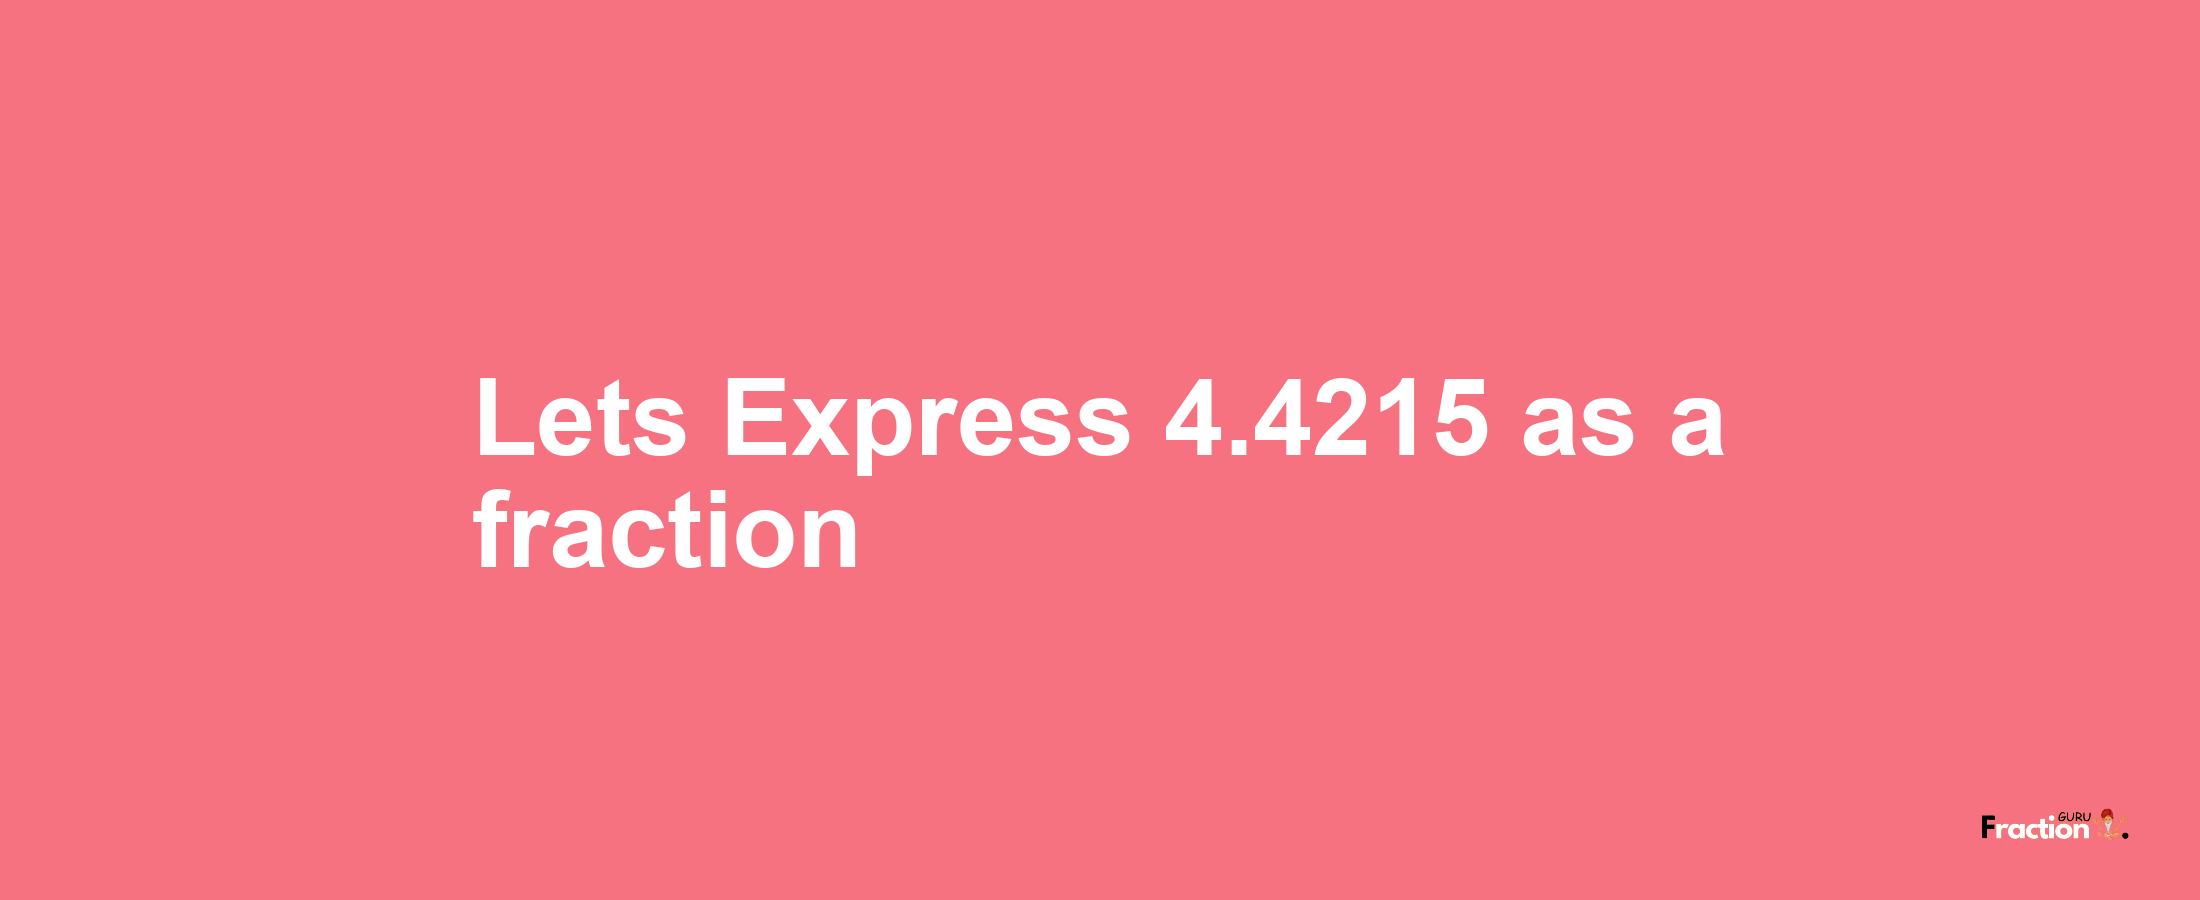 Lets Express 4.4215 as afraction